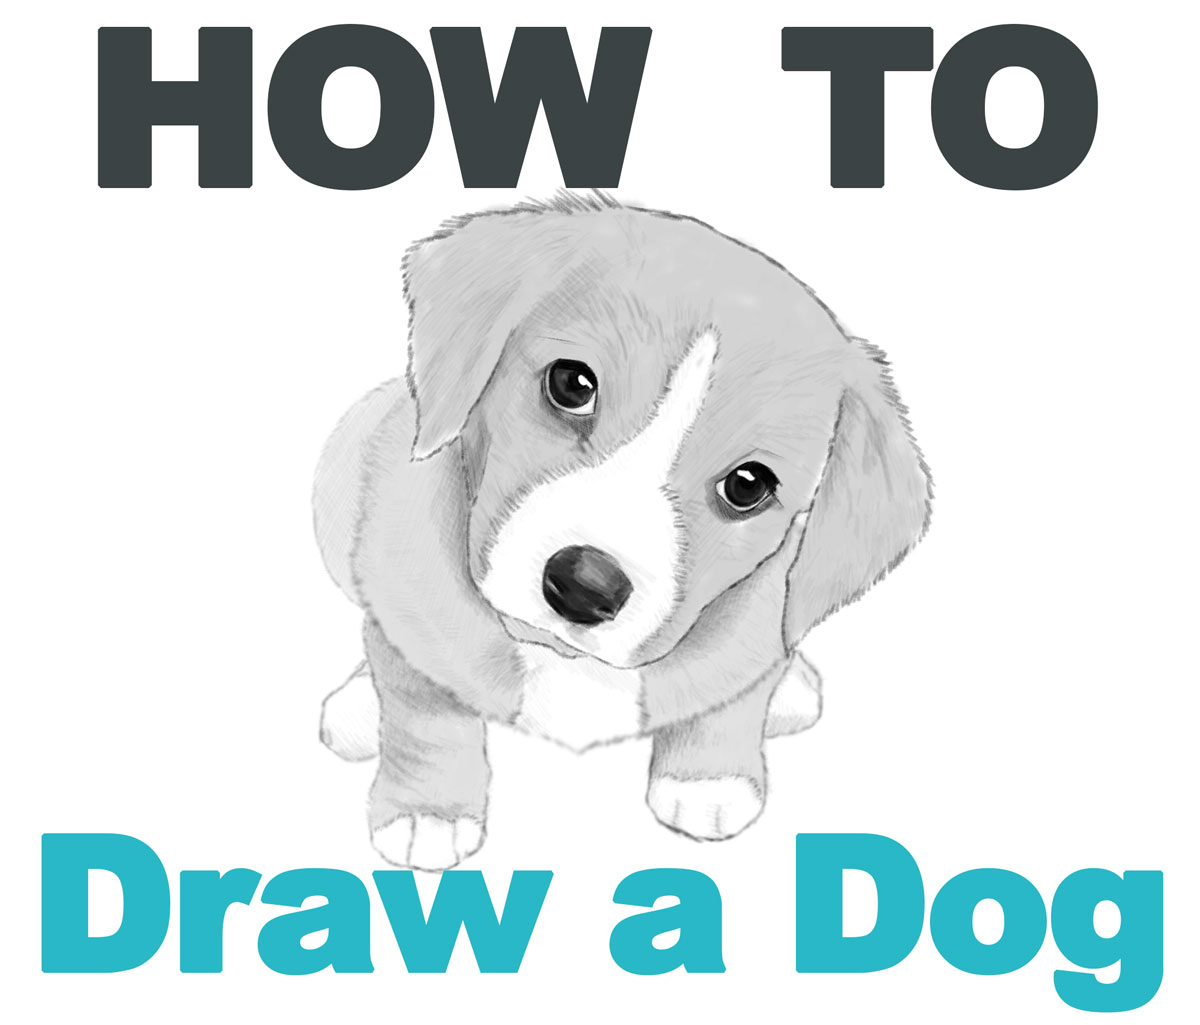 How to Draw a Dog or Puppy Realistic - Easy Step by Step Drawing ...